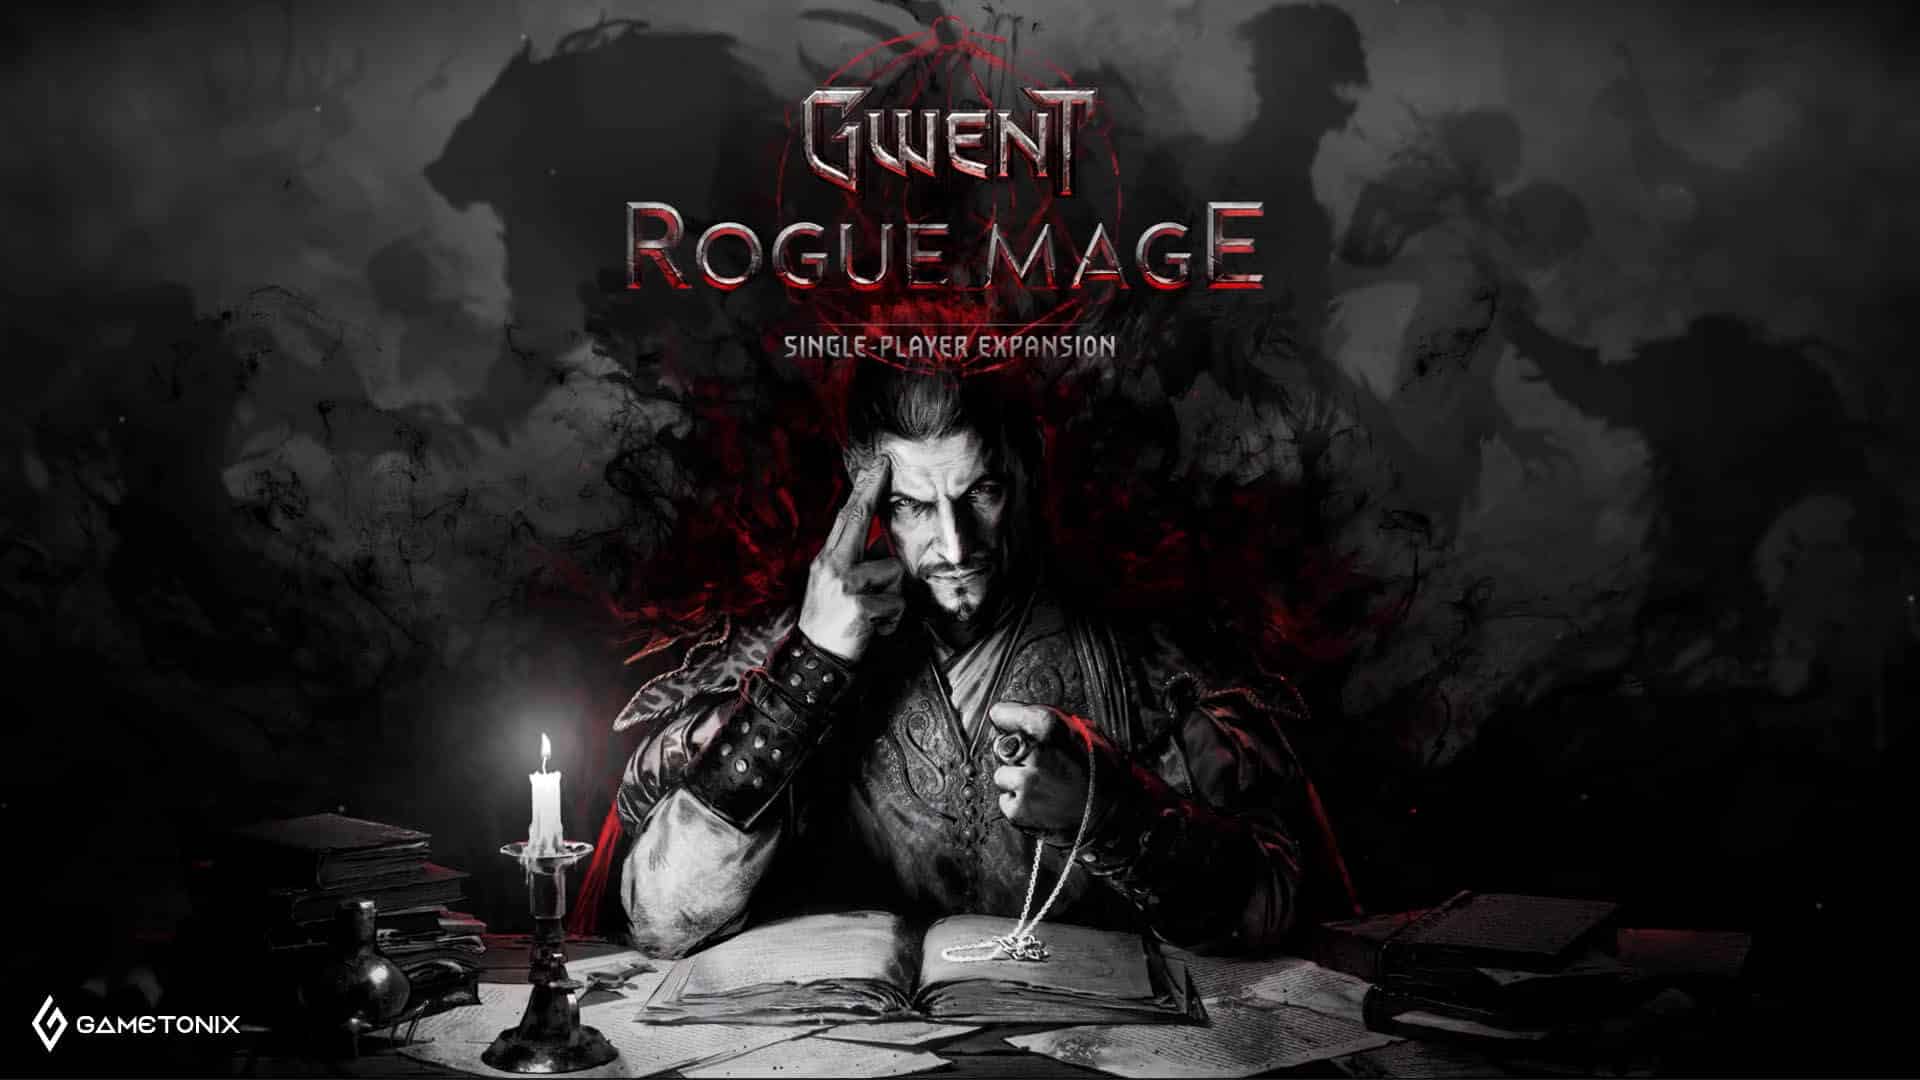 Gwent Rouge Mage